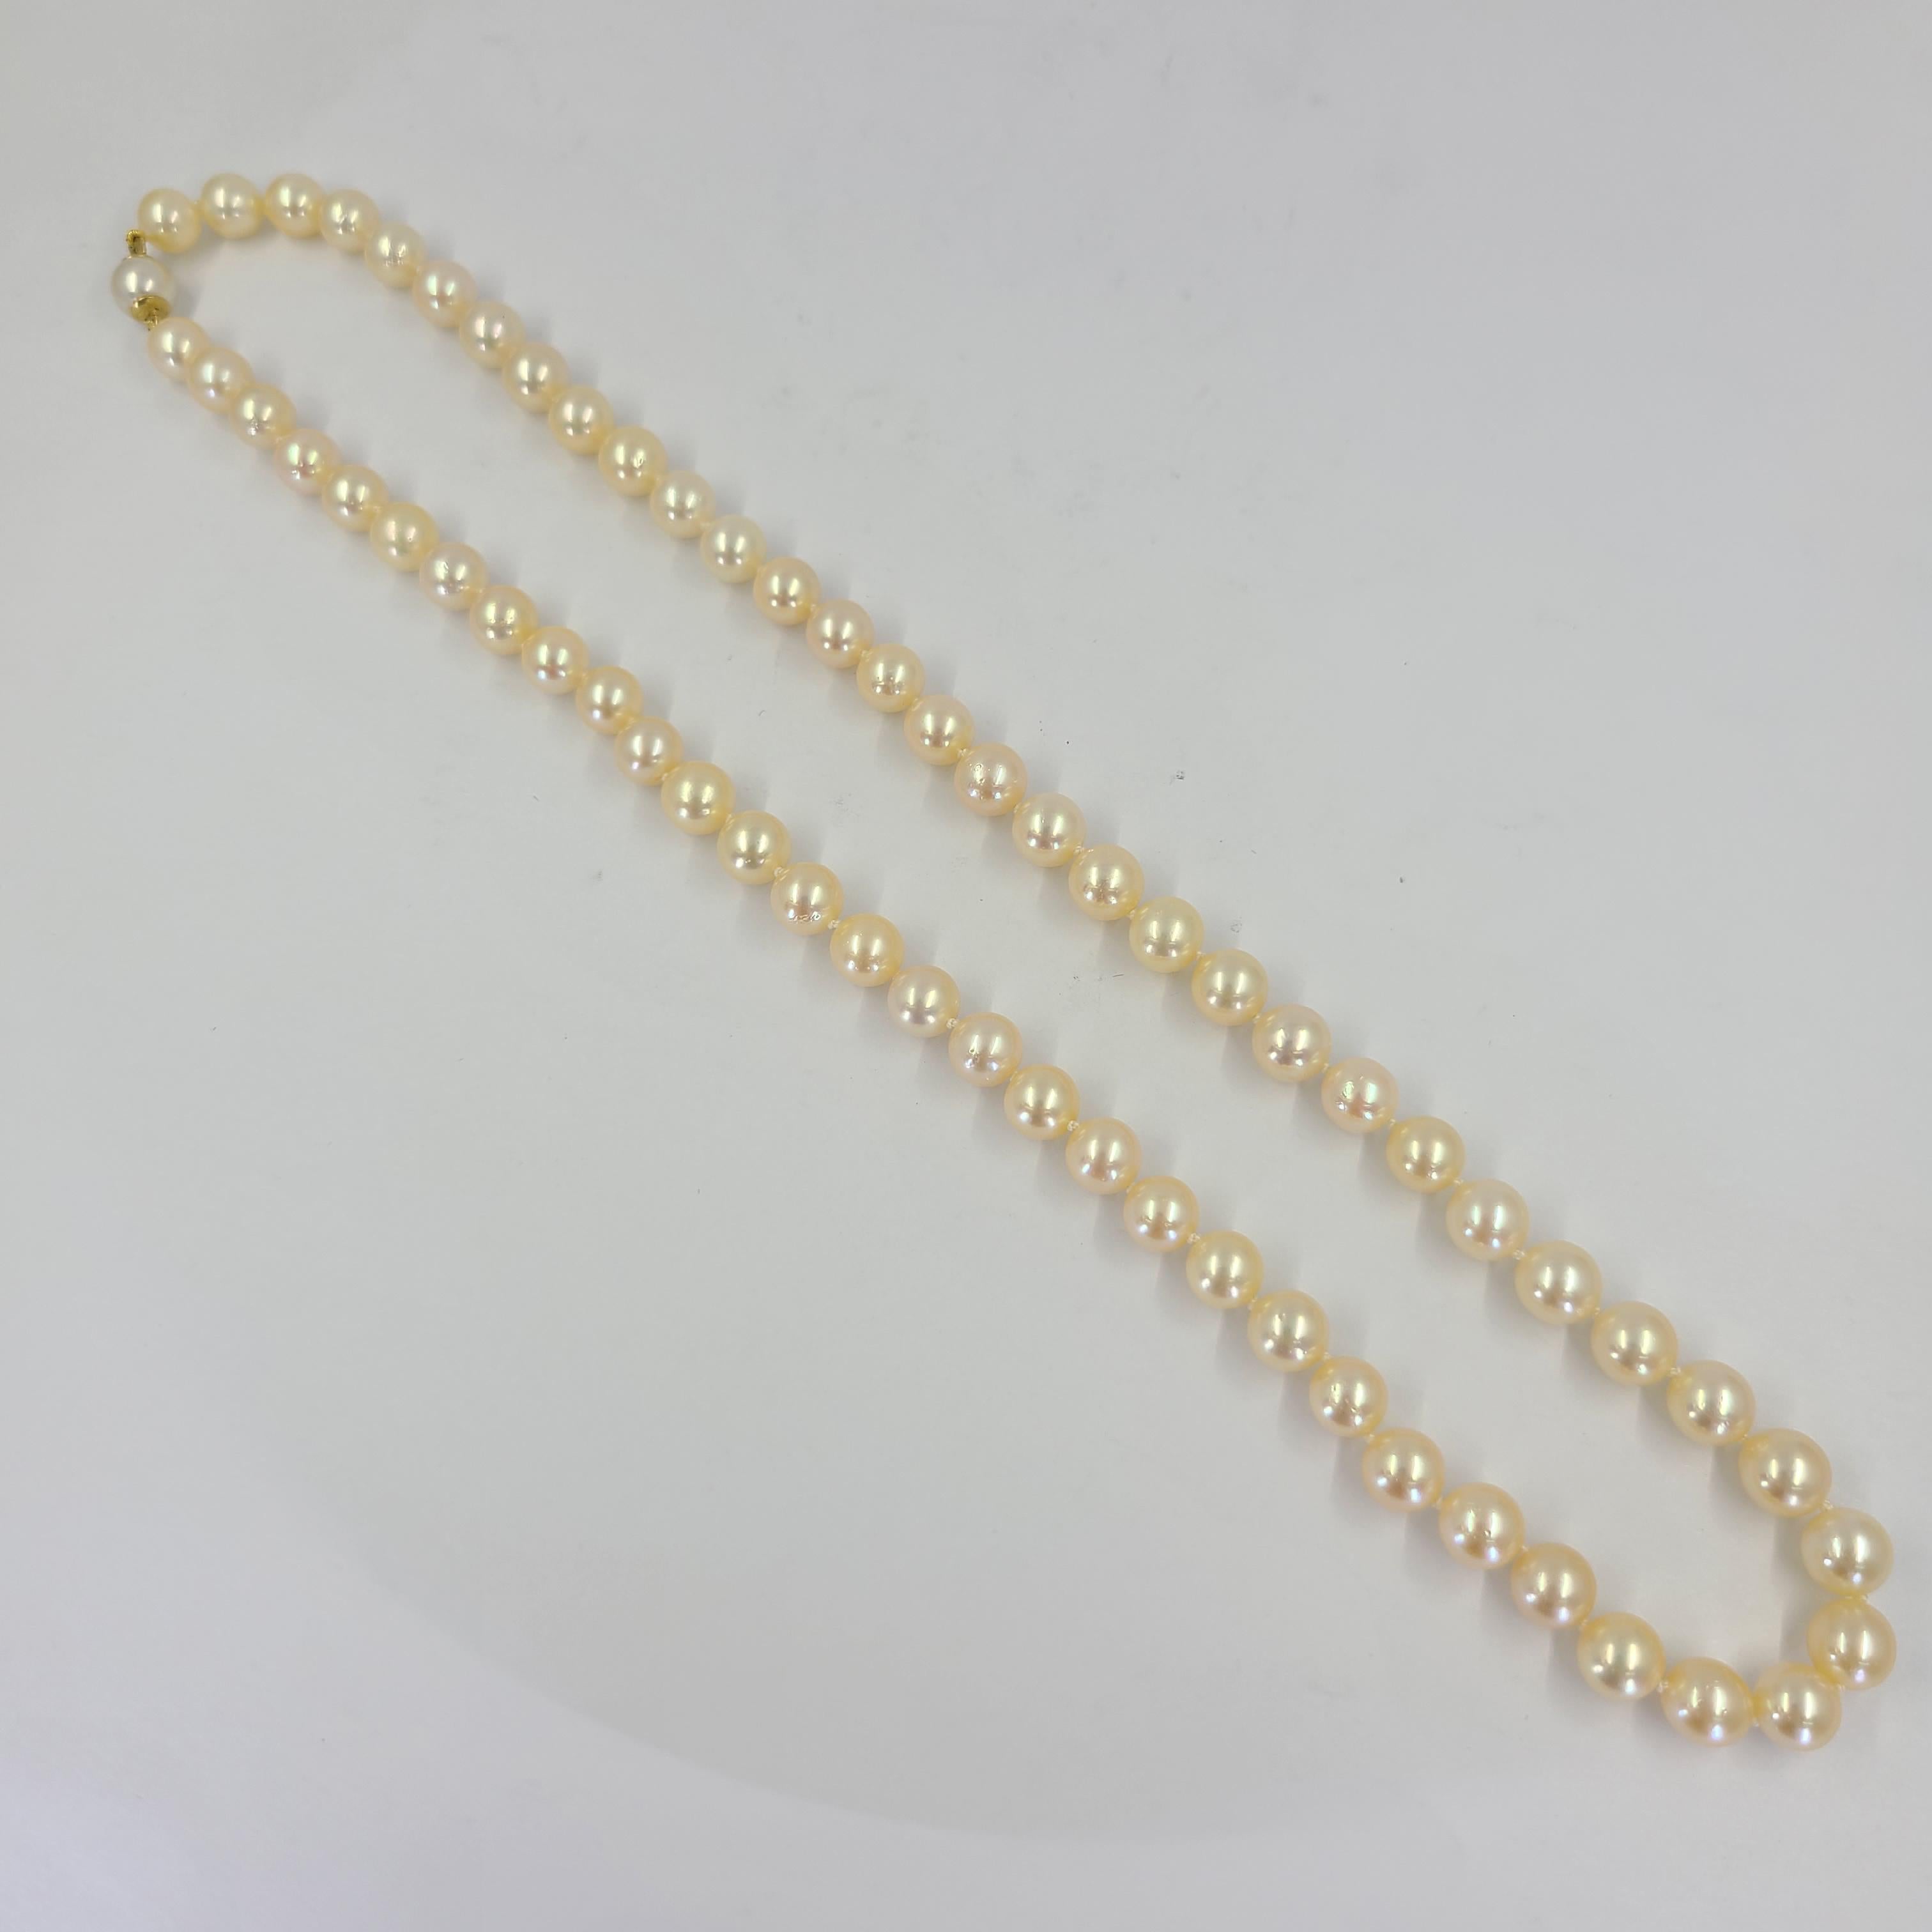 14 Karat Yellow Gold Pearl Strand Necklace Featuring 114 Cream Colored Round Cultured Pearls Measuring 8mm In Diameter. 20 Inch Length With Hidden Pearl Clasp.